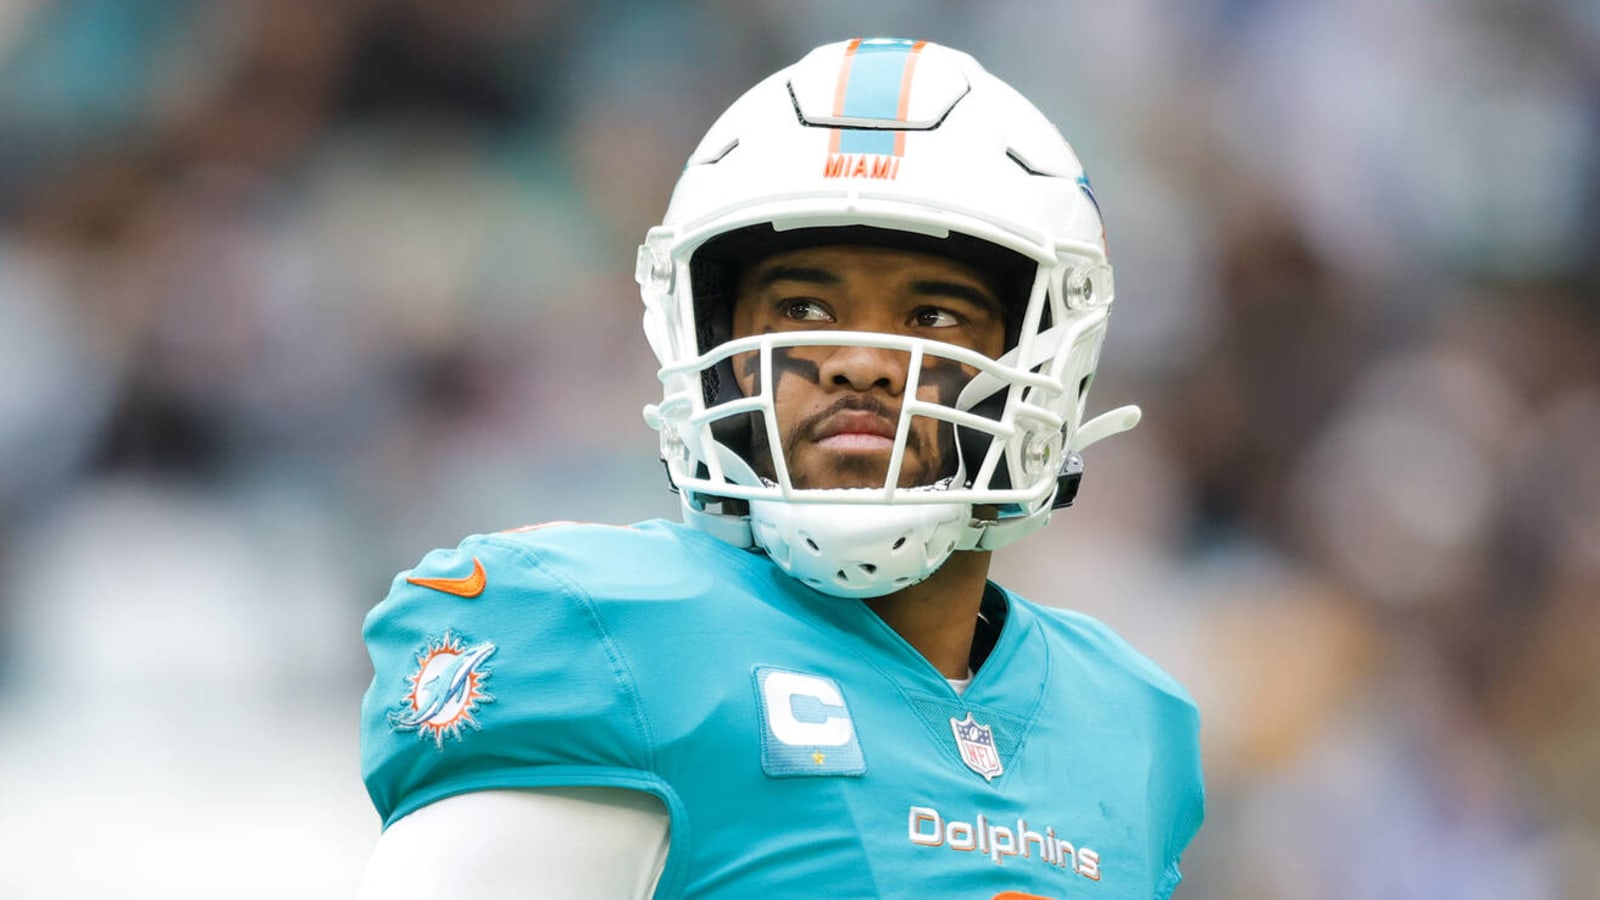 Tua 'thankful' Dolphins kept him in concussion protocol